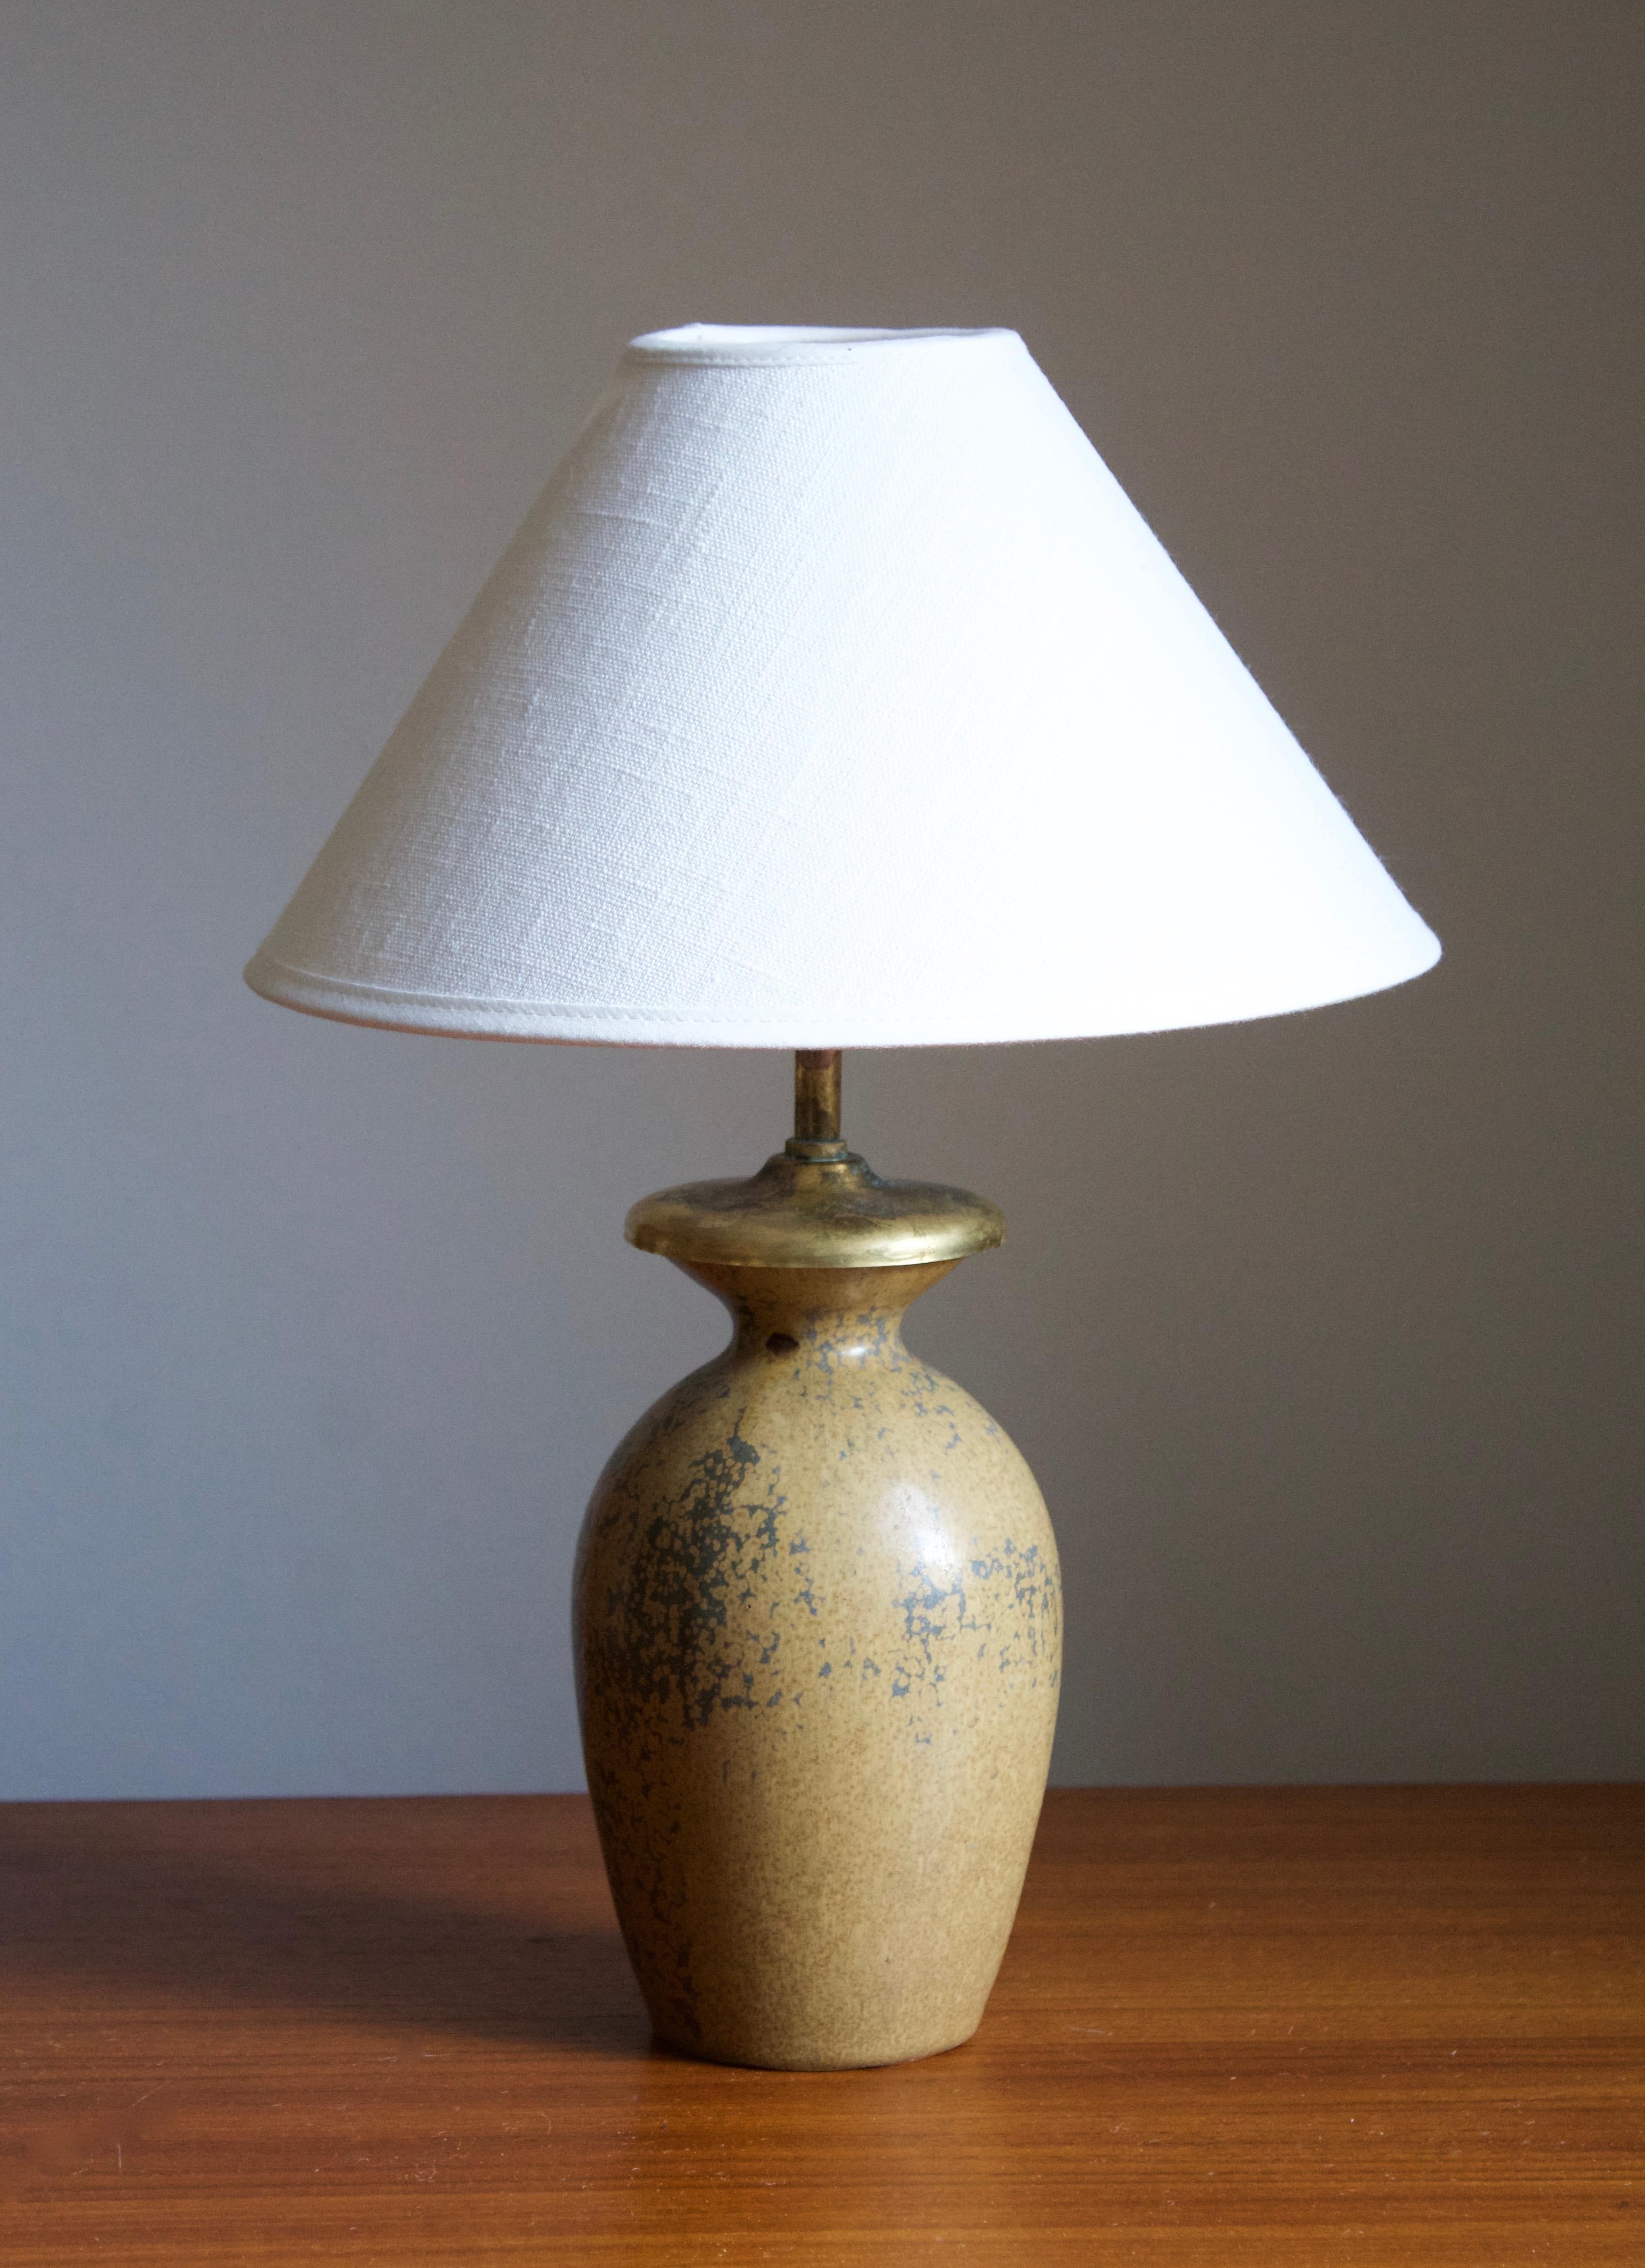 A table lamp. Designed by Arne Bang, produced c. 1927. Glazed stoneware. 

Stated dimensions exclude the lampshade. Stated height includes socket. Sold without lampshade.

Glaze features a beige color.

Other designers of the period include Axel